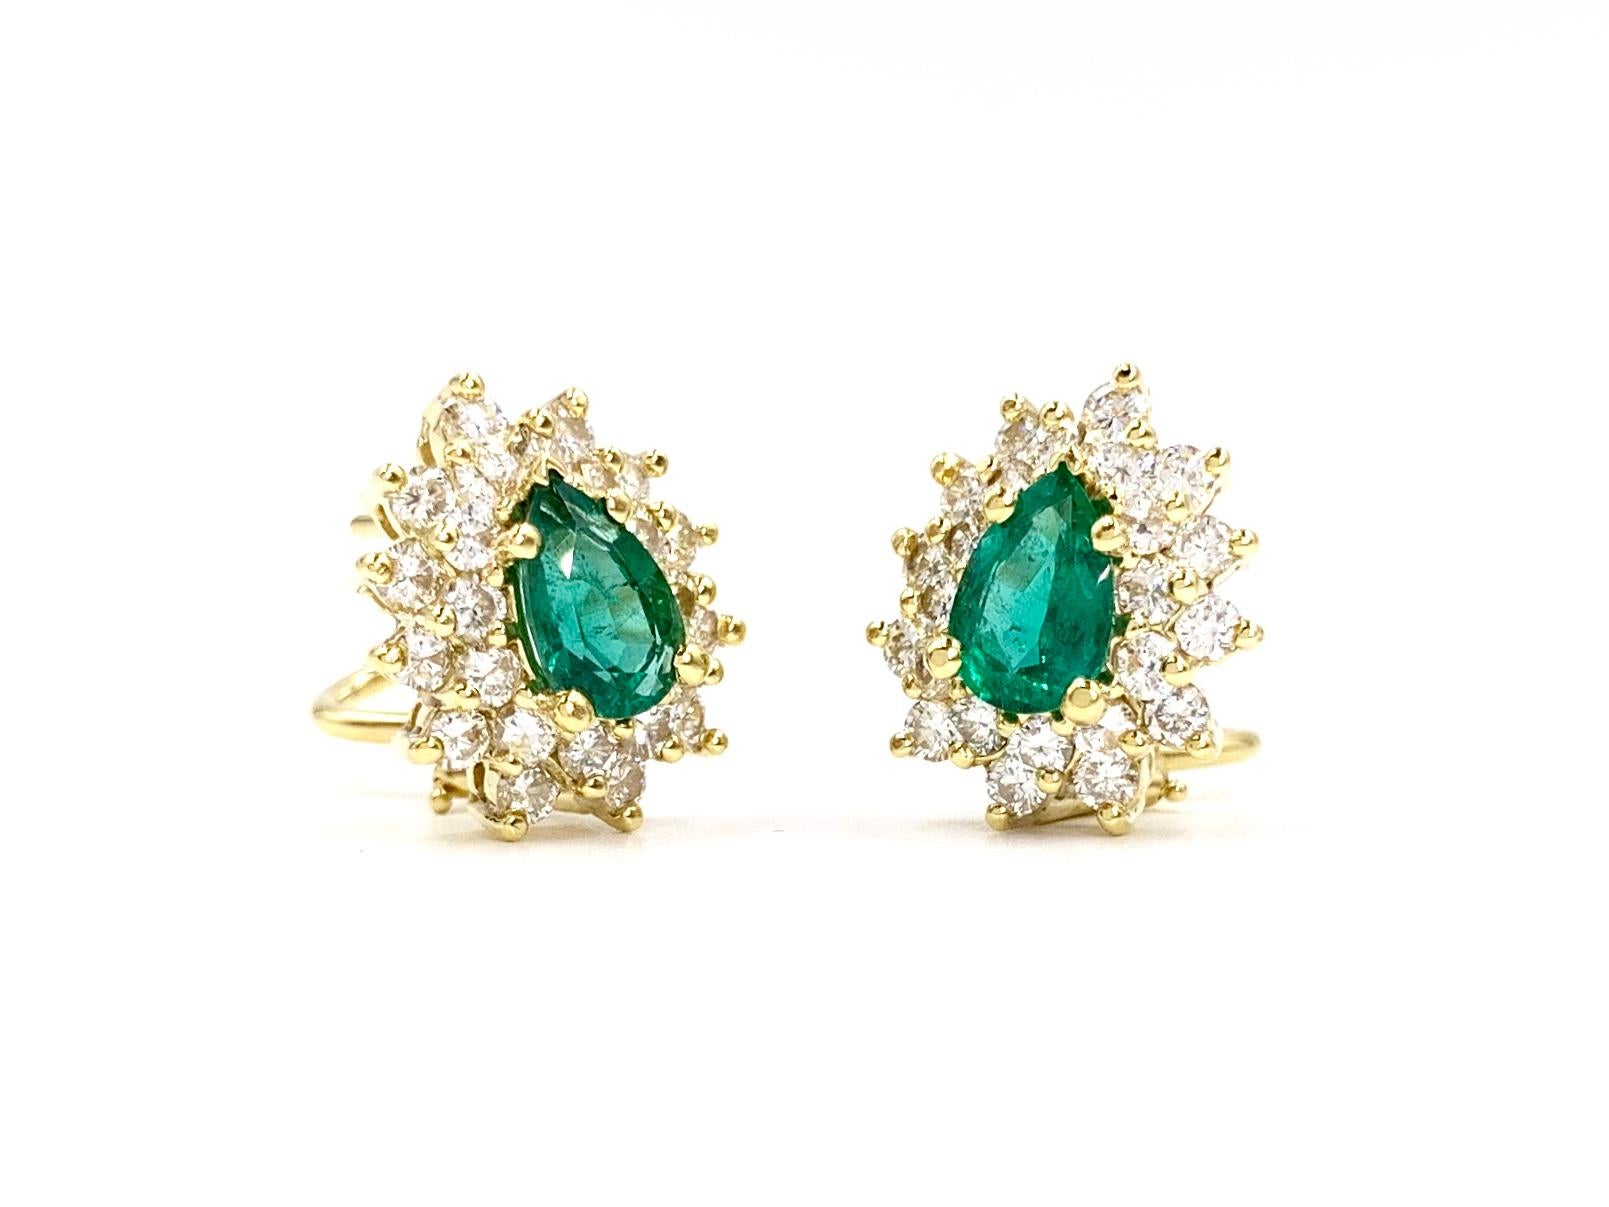 Classic and timeless 18 karat yellow gold pear shape emerald and diamond earrings by Martin Flyer. Earrings have a total emerald weight of 1.64 carats and total diamond weight of 1.85 carats. Pear shape emeralds have a beautiful make with excellent